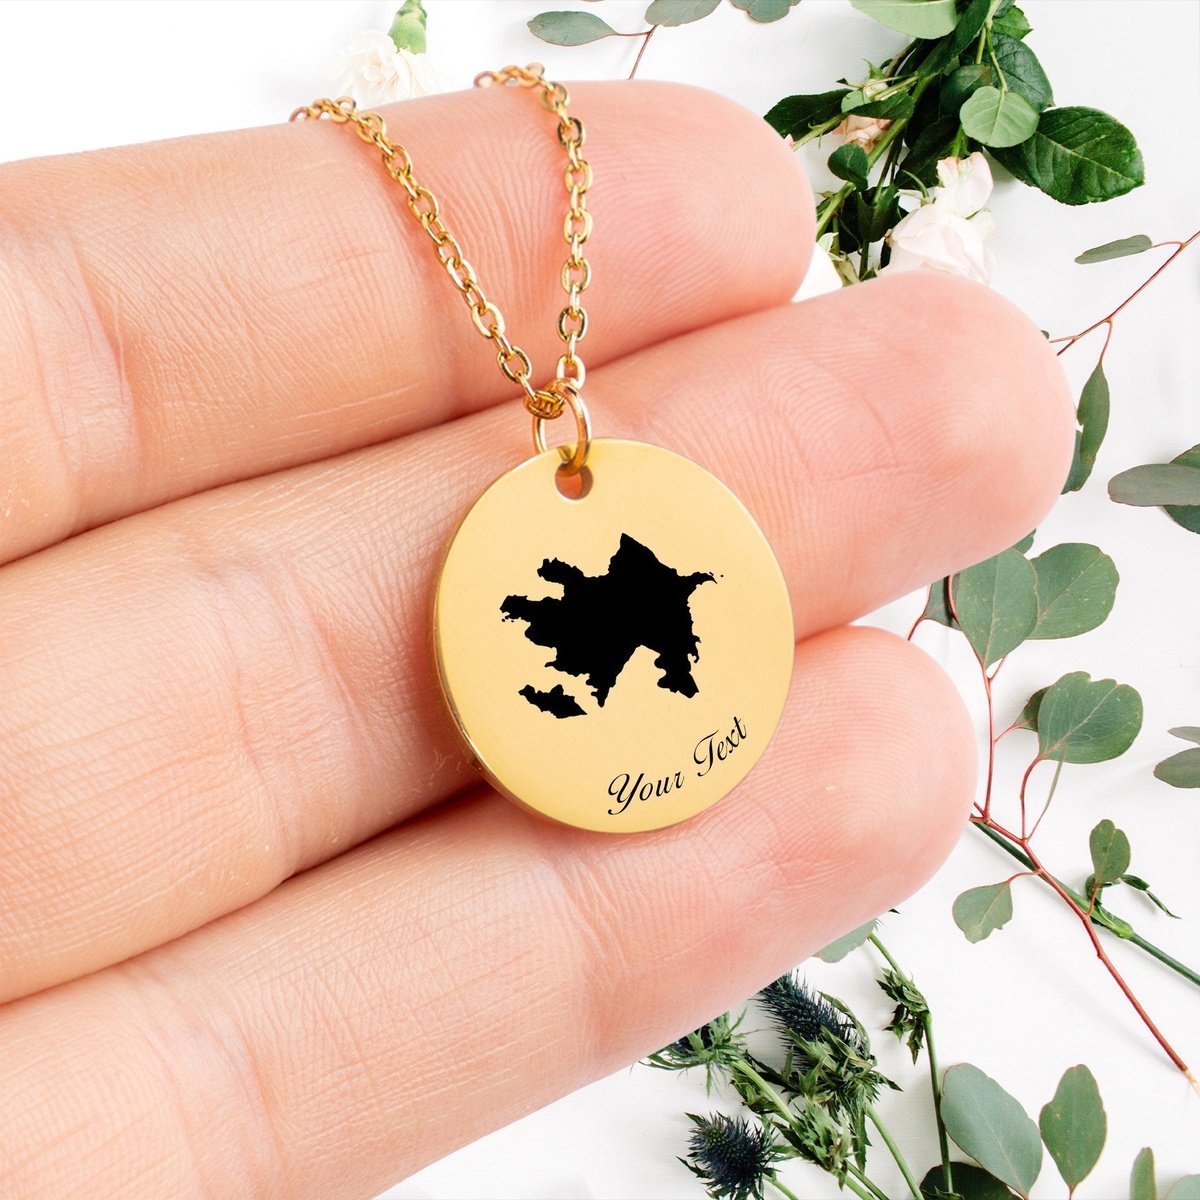 Azerbaijan Country Map Necklace, Your Name Necklace, Minimalist Necklace, Personalized Gift, Silver Necklace, Gift For Him Her